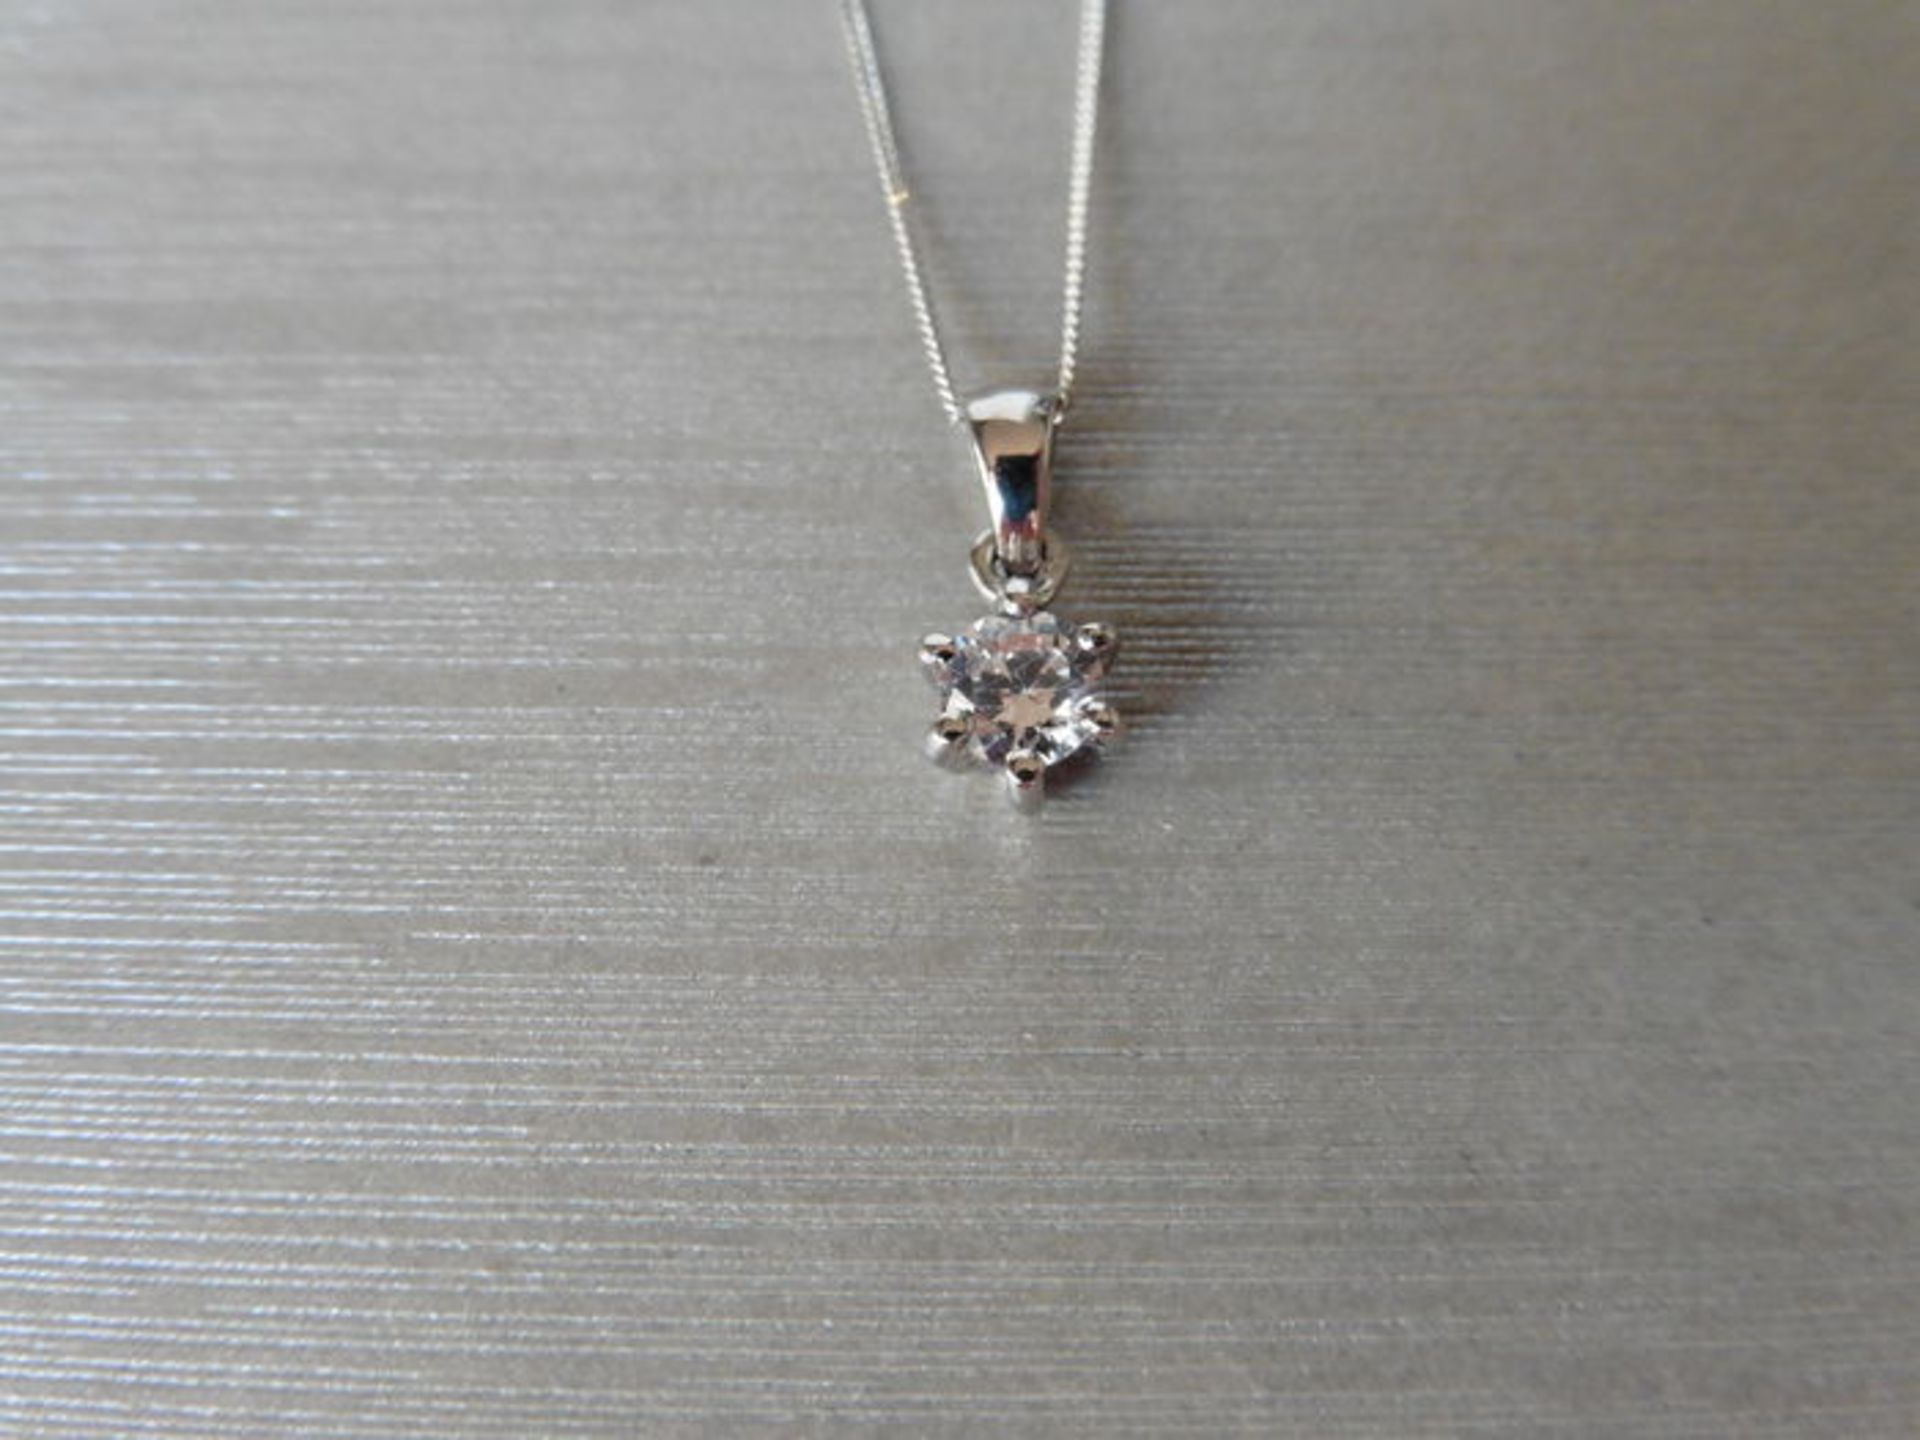 0.25ct diamond solitaire pendant set in 18ct gold. 6 claw setting - Image 2 of 4